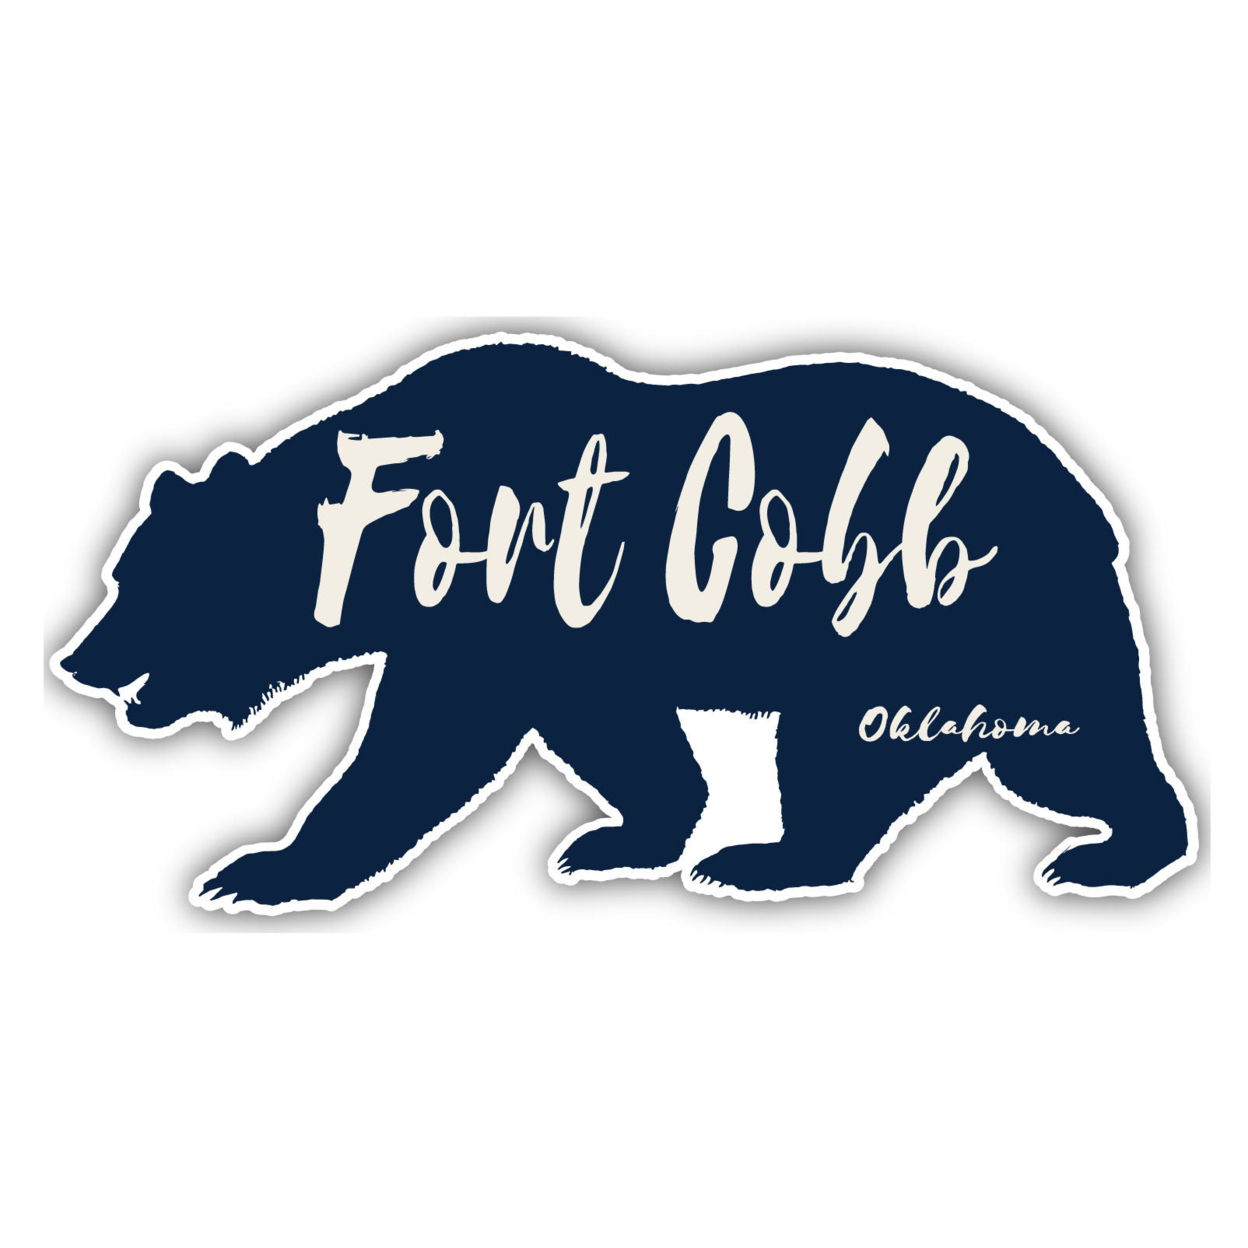 Fort Cobb Oklahoma Souvenir Decorative Stickers (Choose Theme And Size) - 4-Pack, 10-Inch, Bear